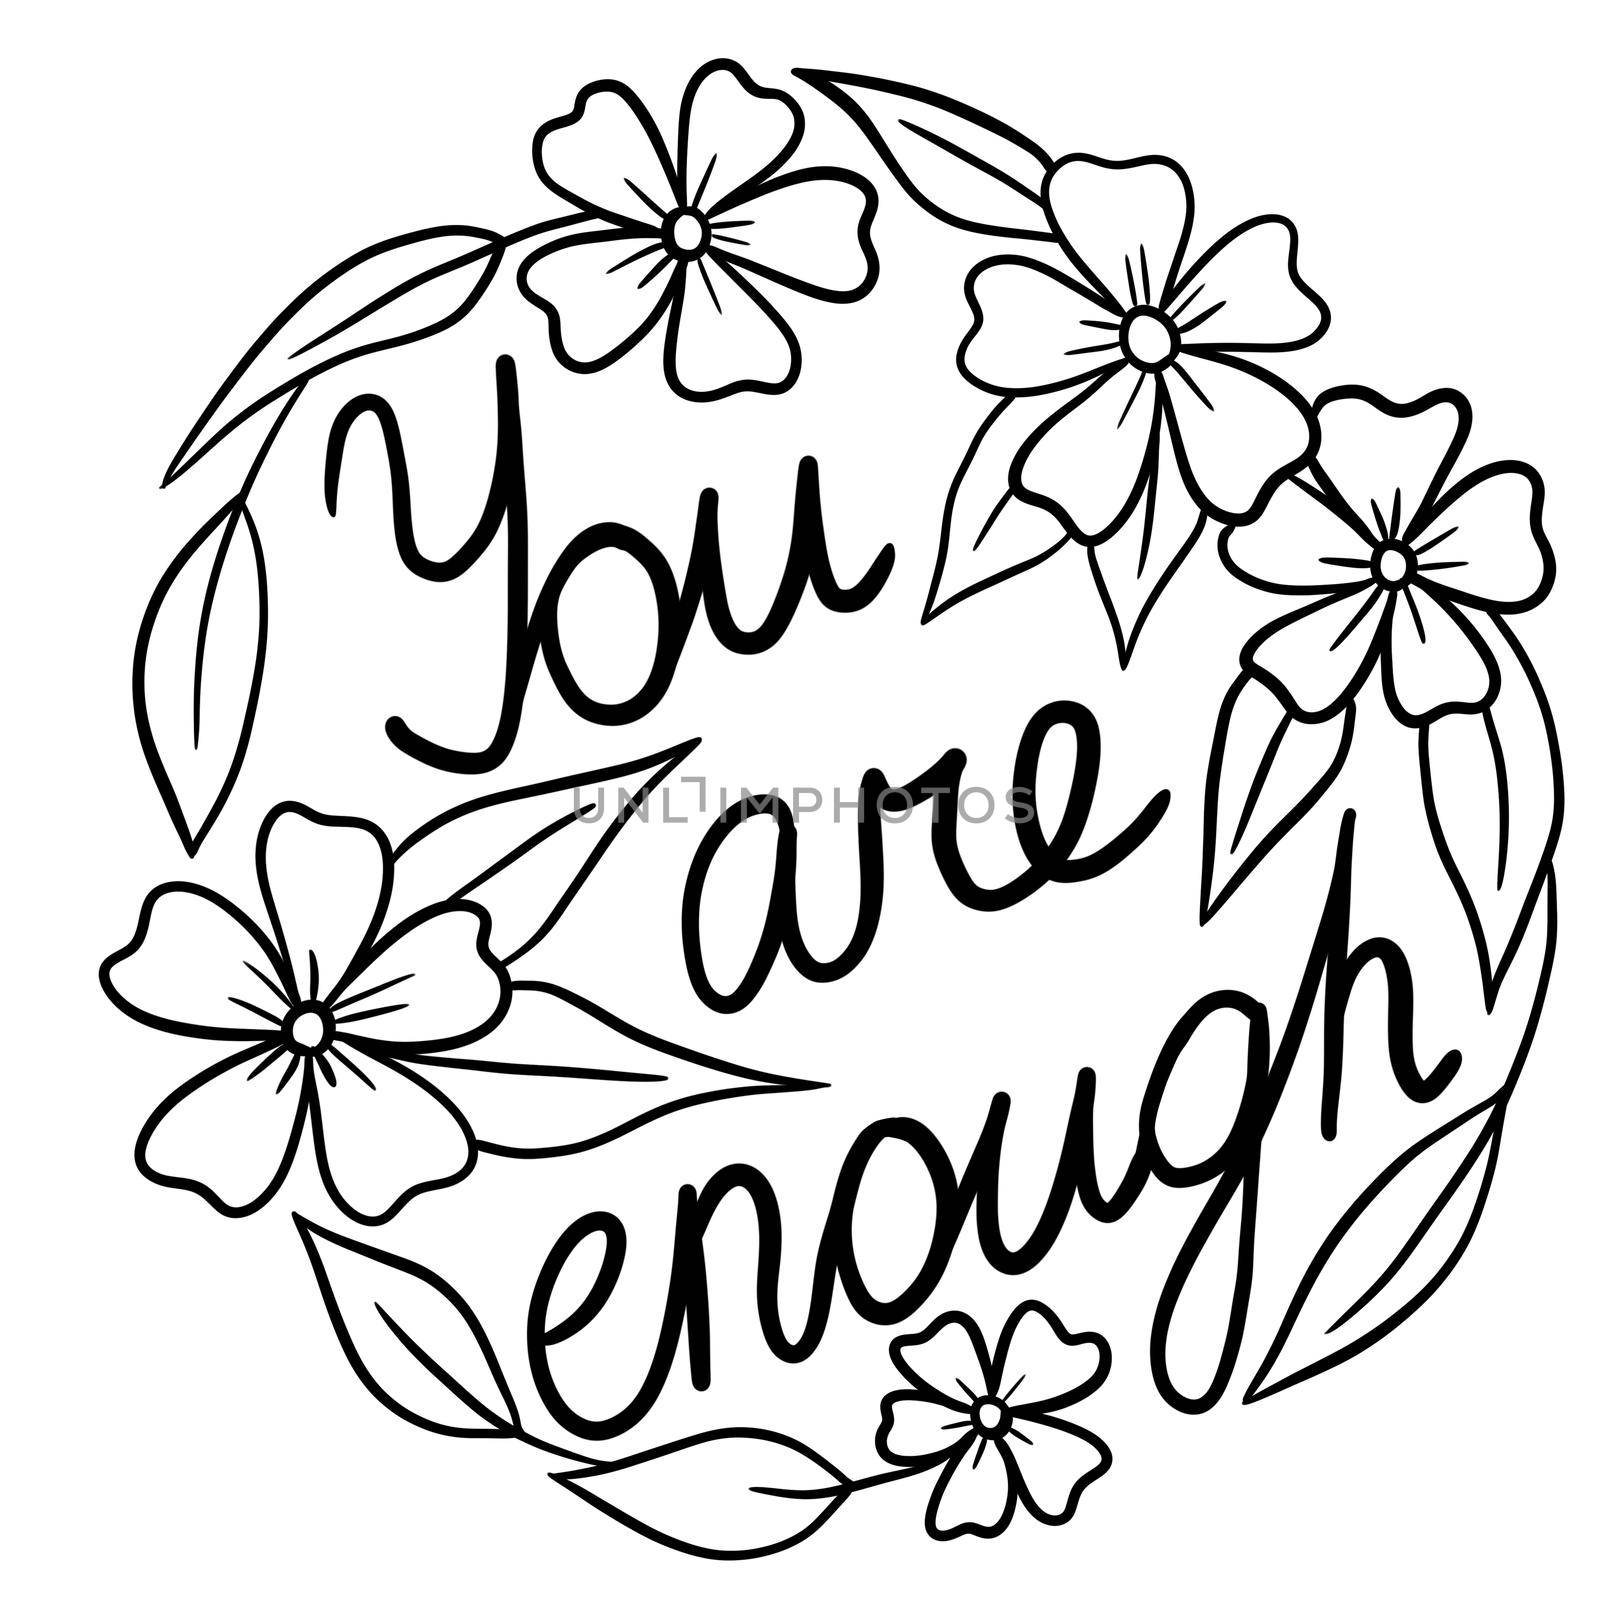 Round circle illustration with flowers You Are Enough word. Floral black line outline design for poster cards with leaf leaves blooming daisy, motivation affirmation. by Lagmar